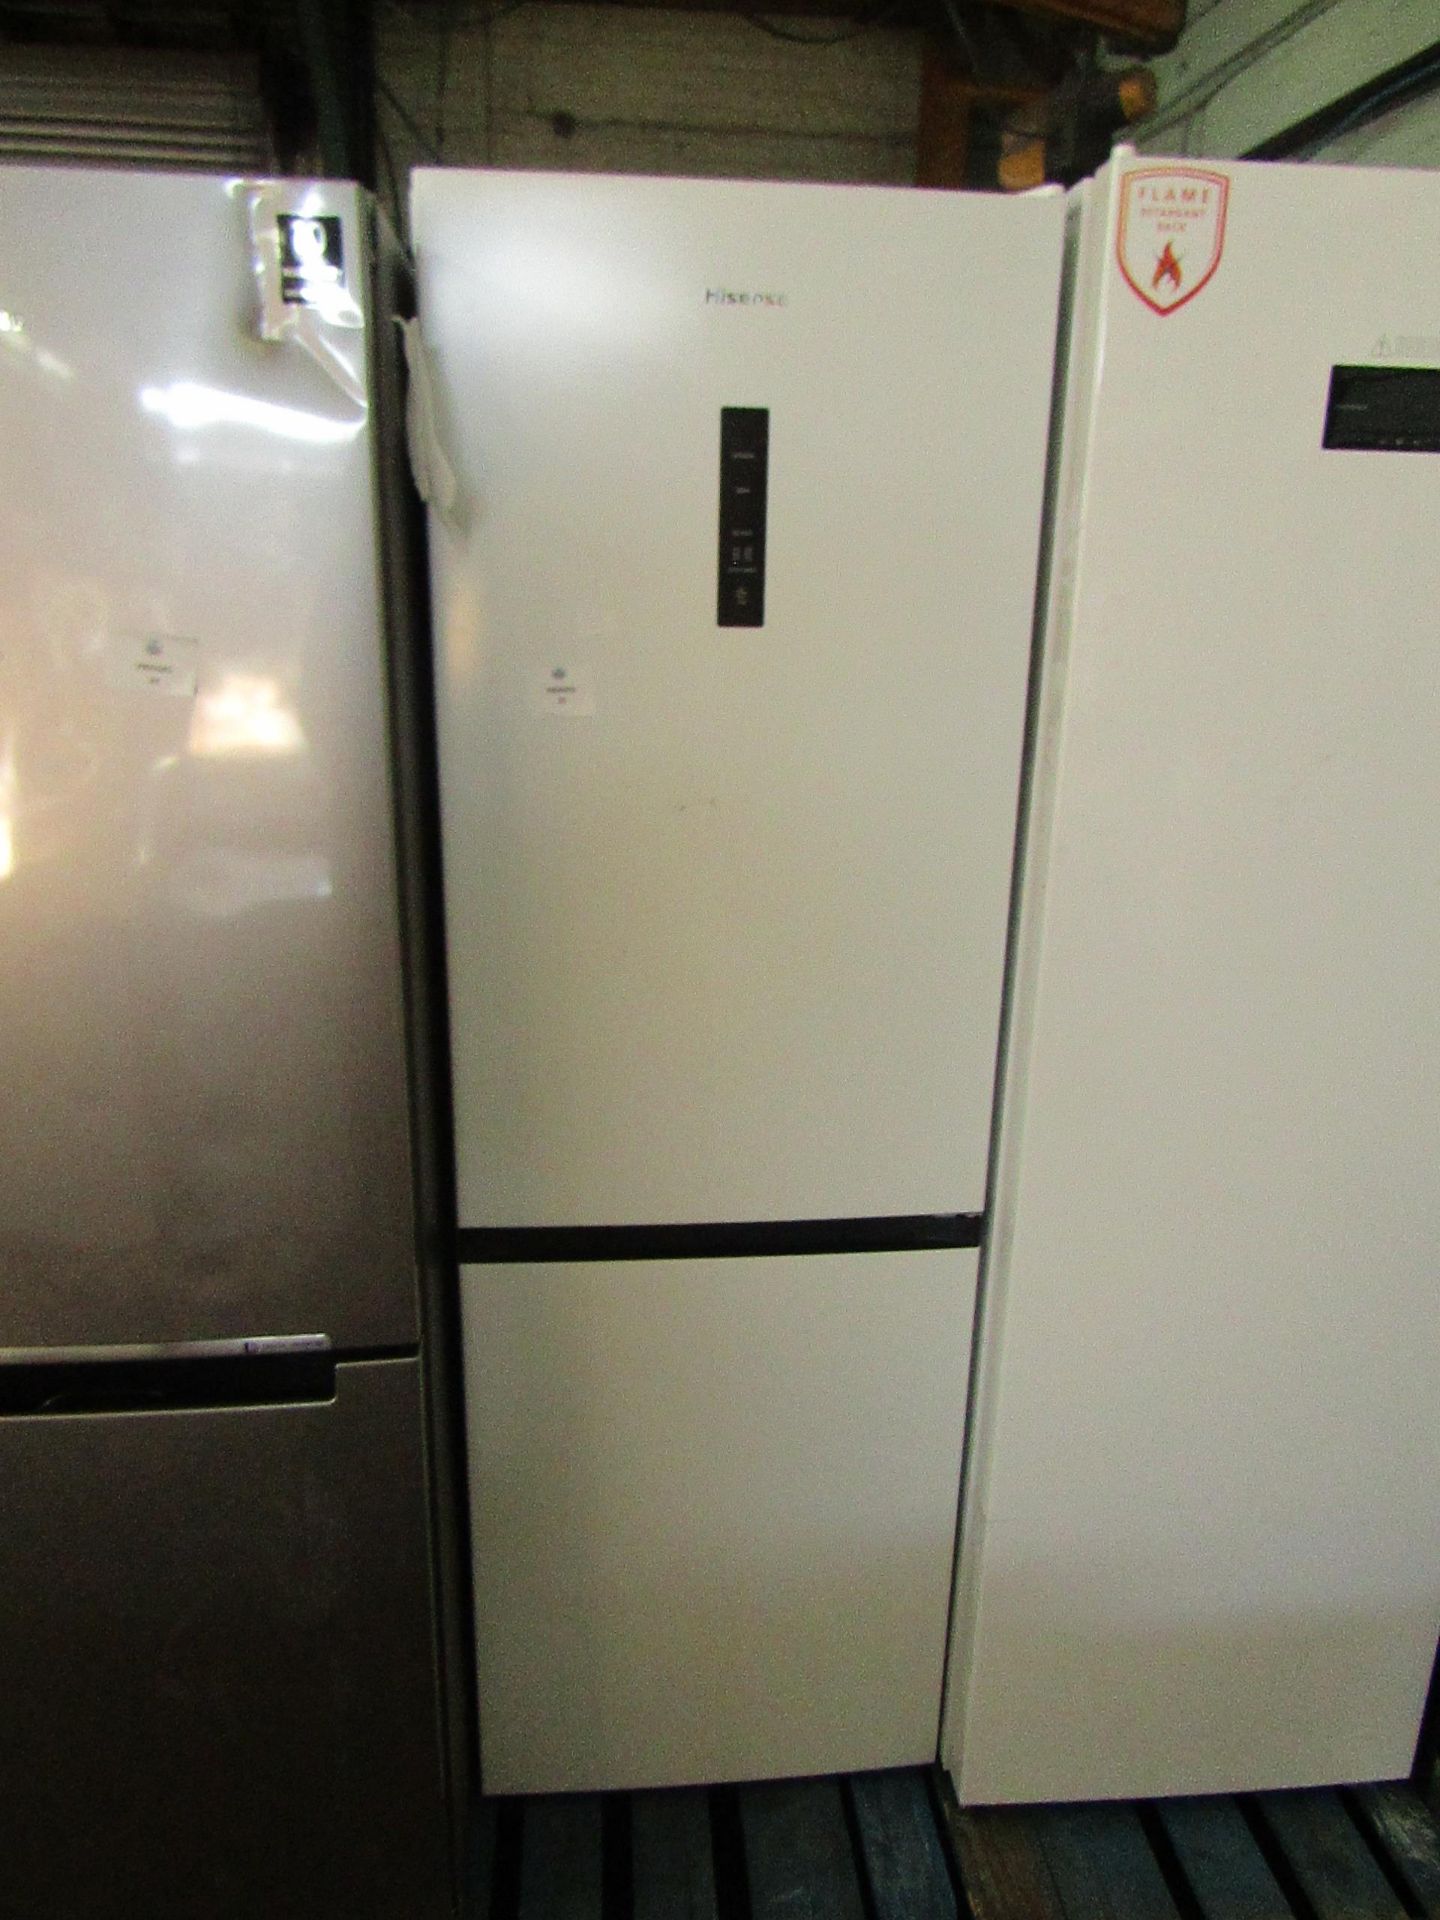 Hisense Fridge freezer, clean insode and one small dent on the freezer door, Tested working for